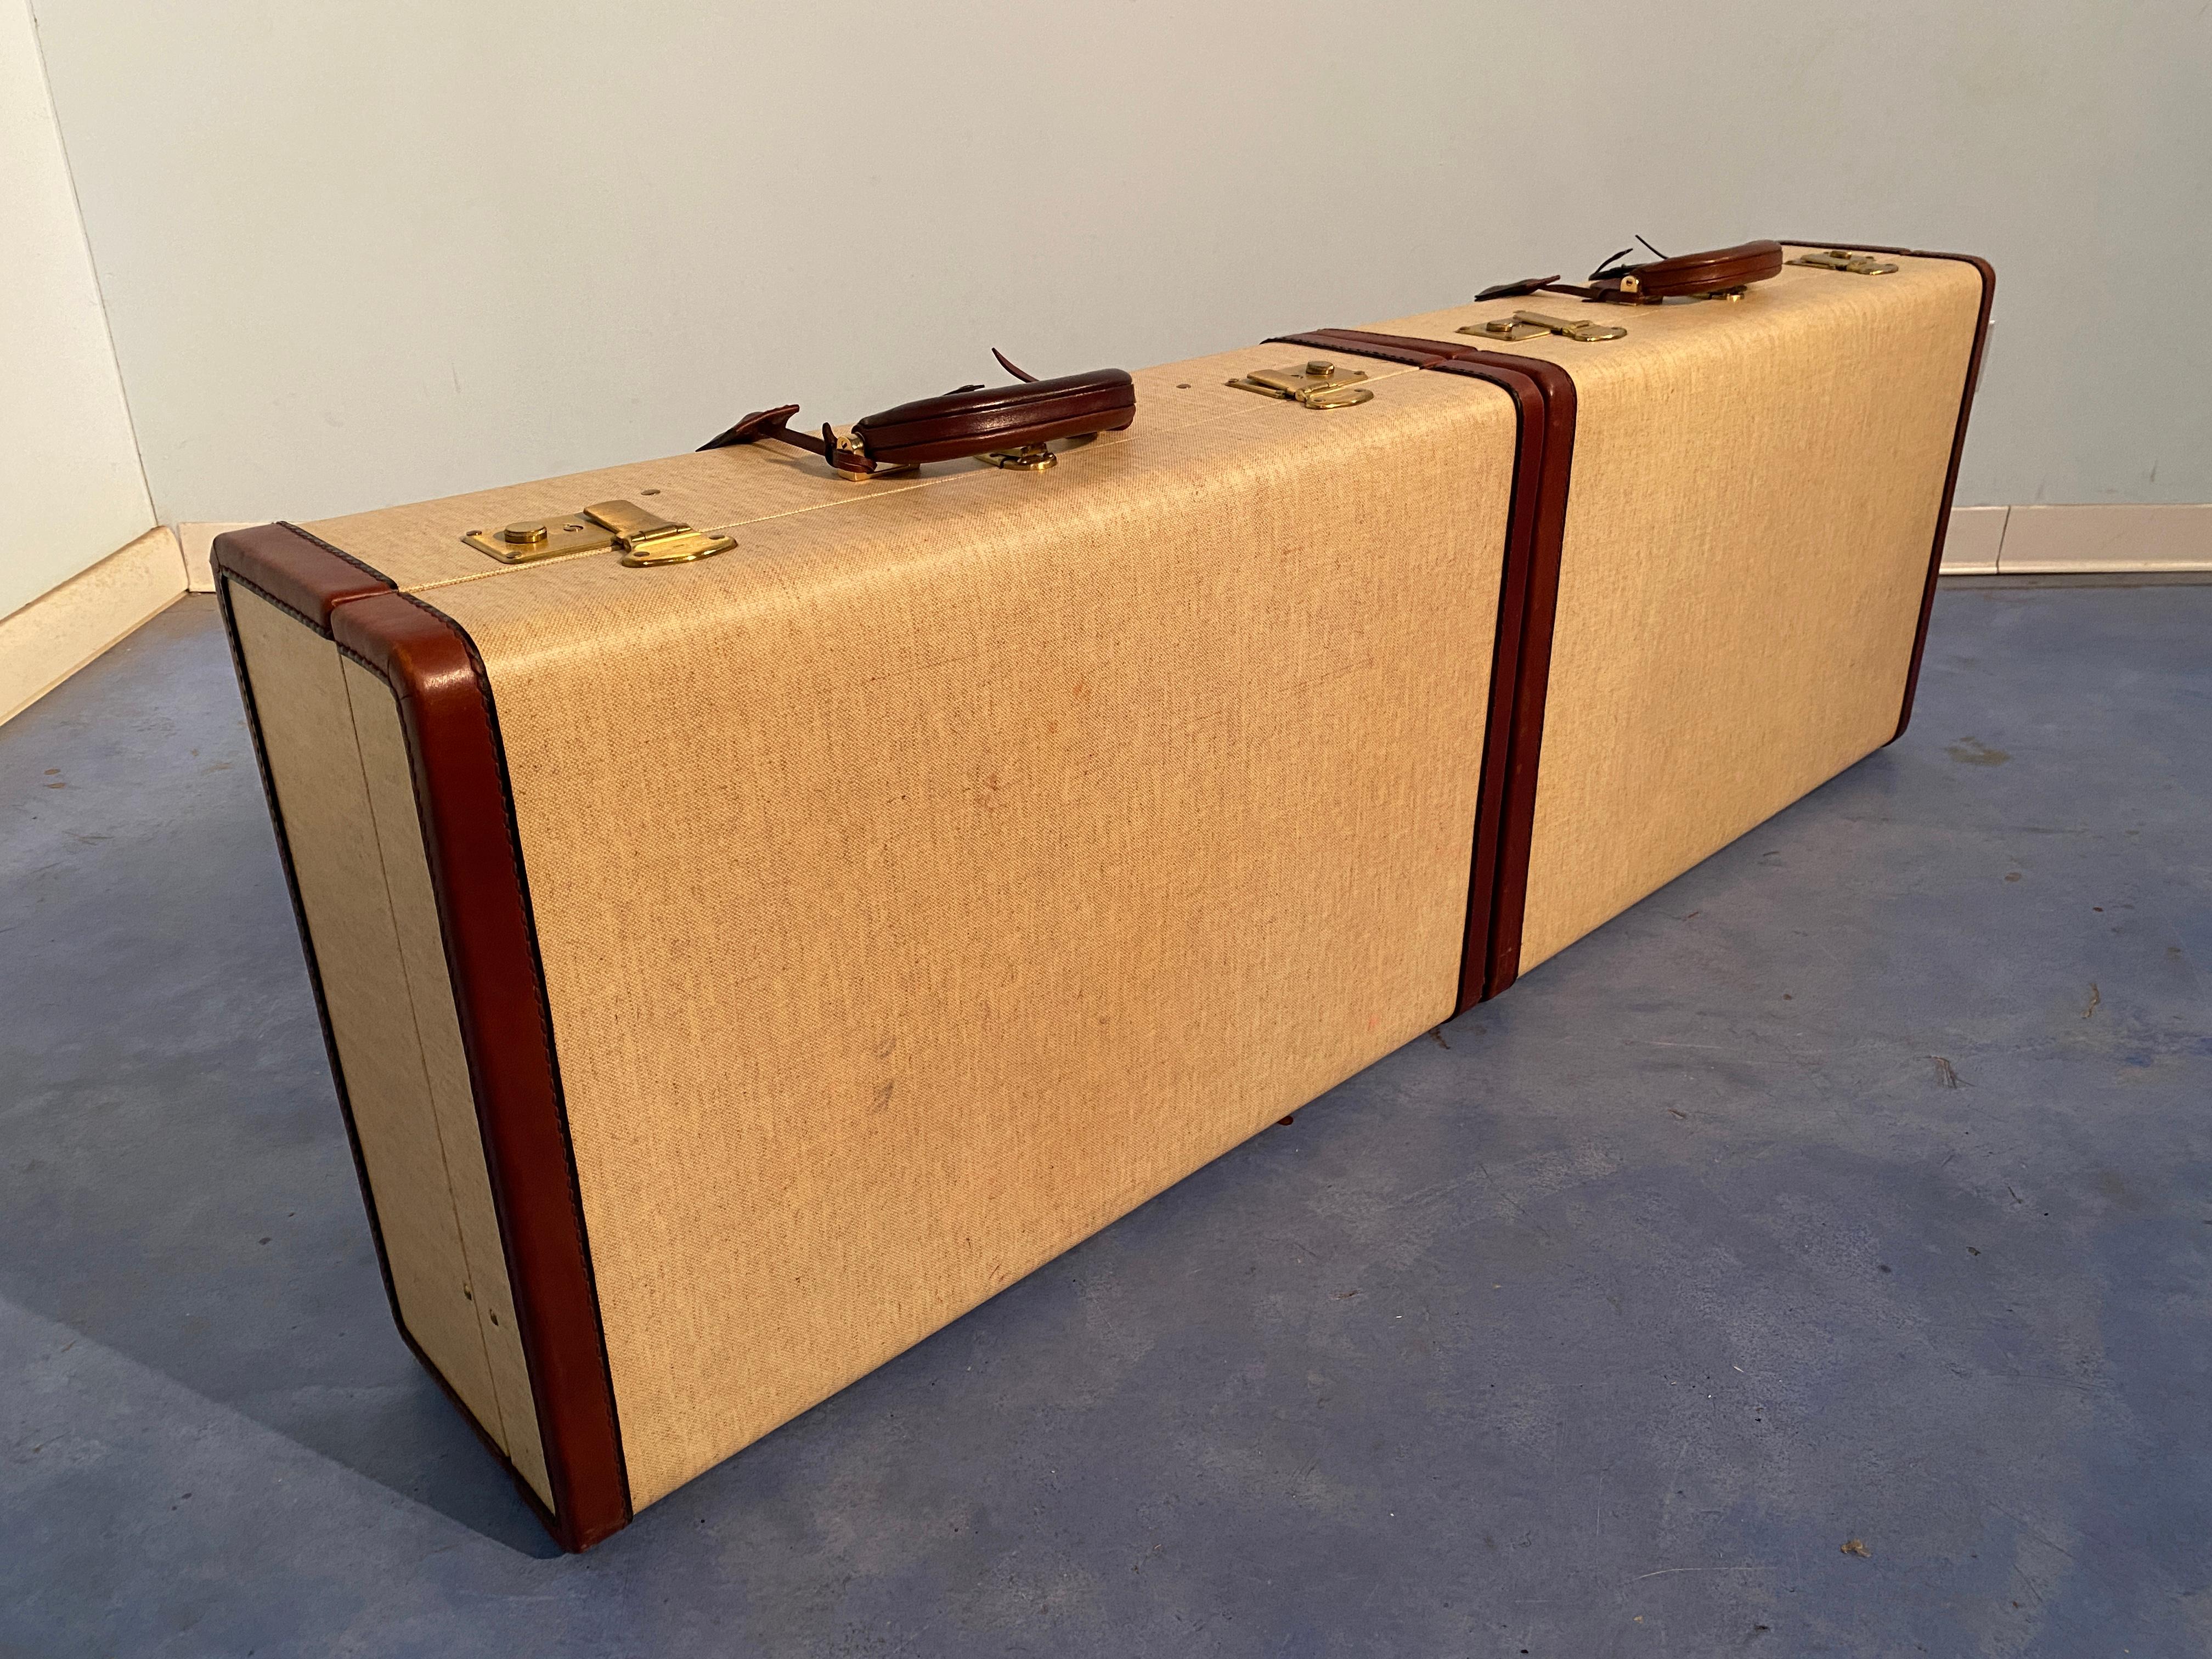 Italian Mid-Century Moder Luggages or Suitcases Mèlange Color, Set of Two, 1960 For Sale 8